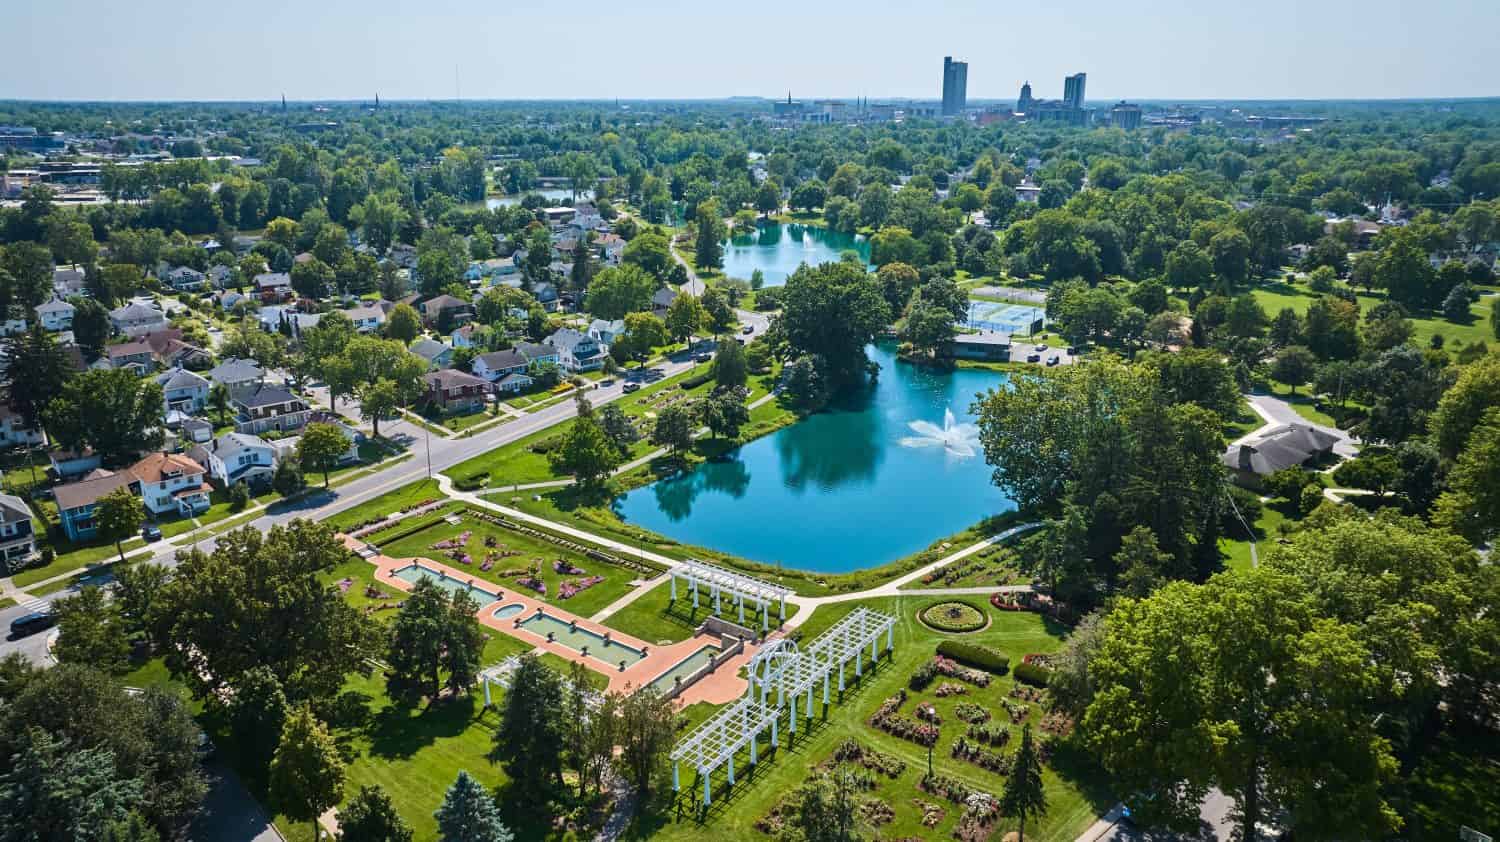 Aerial Lakeside Park gardens and fountains with distant downtown Fort Wayne